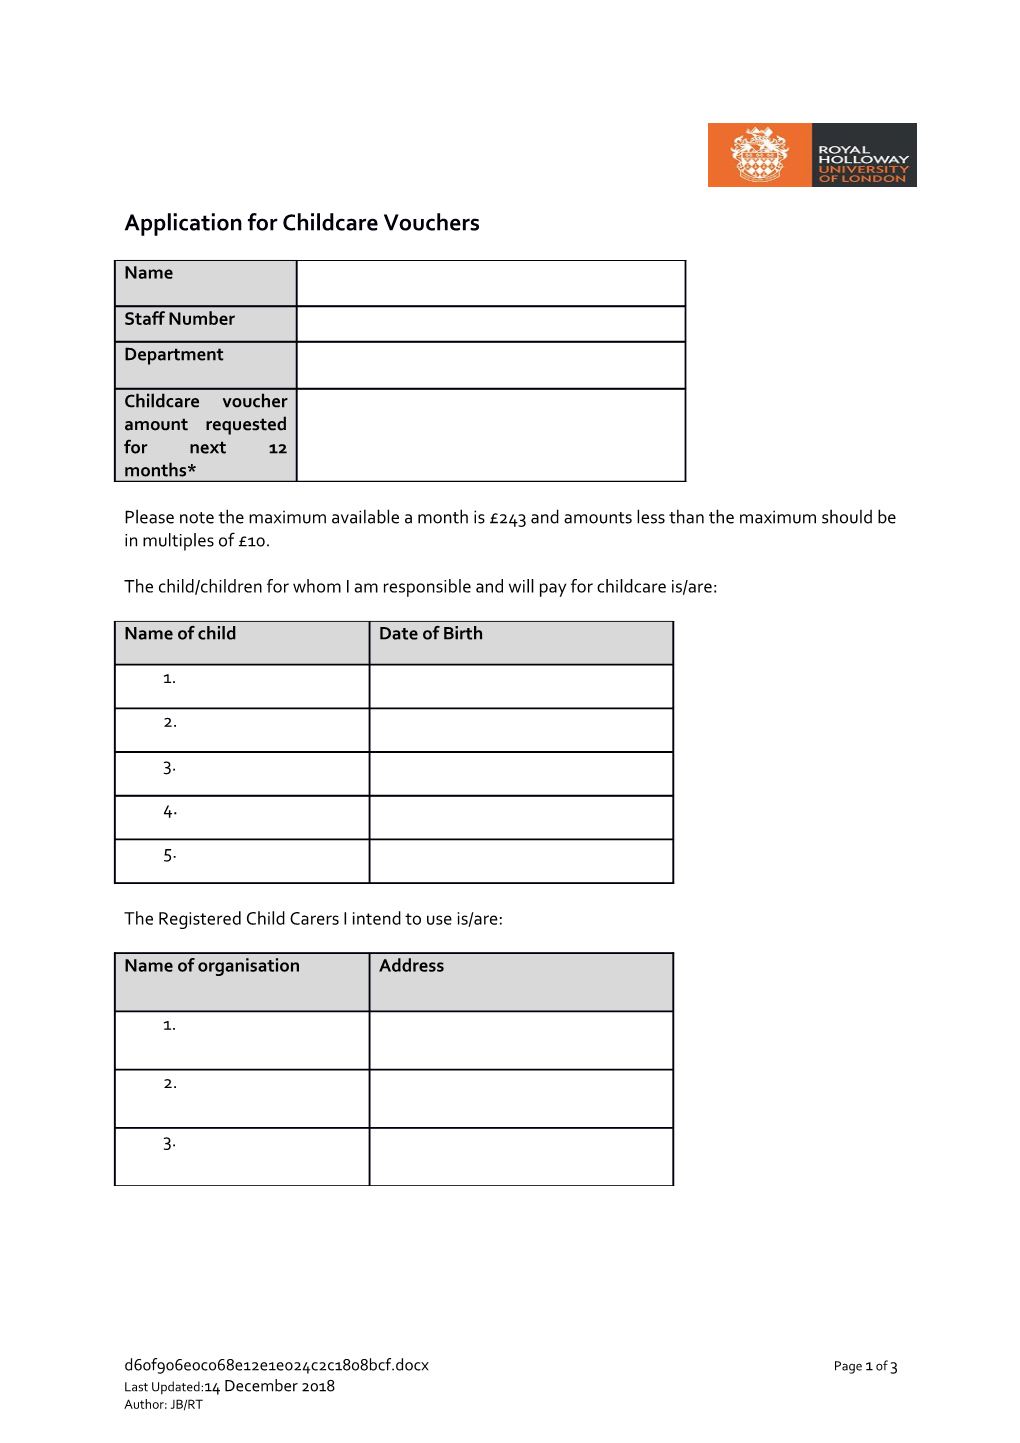 Application for Childcare Vouchers